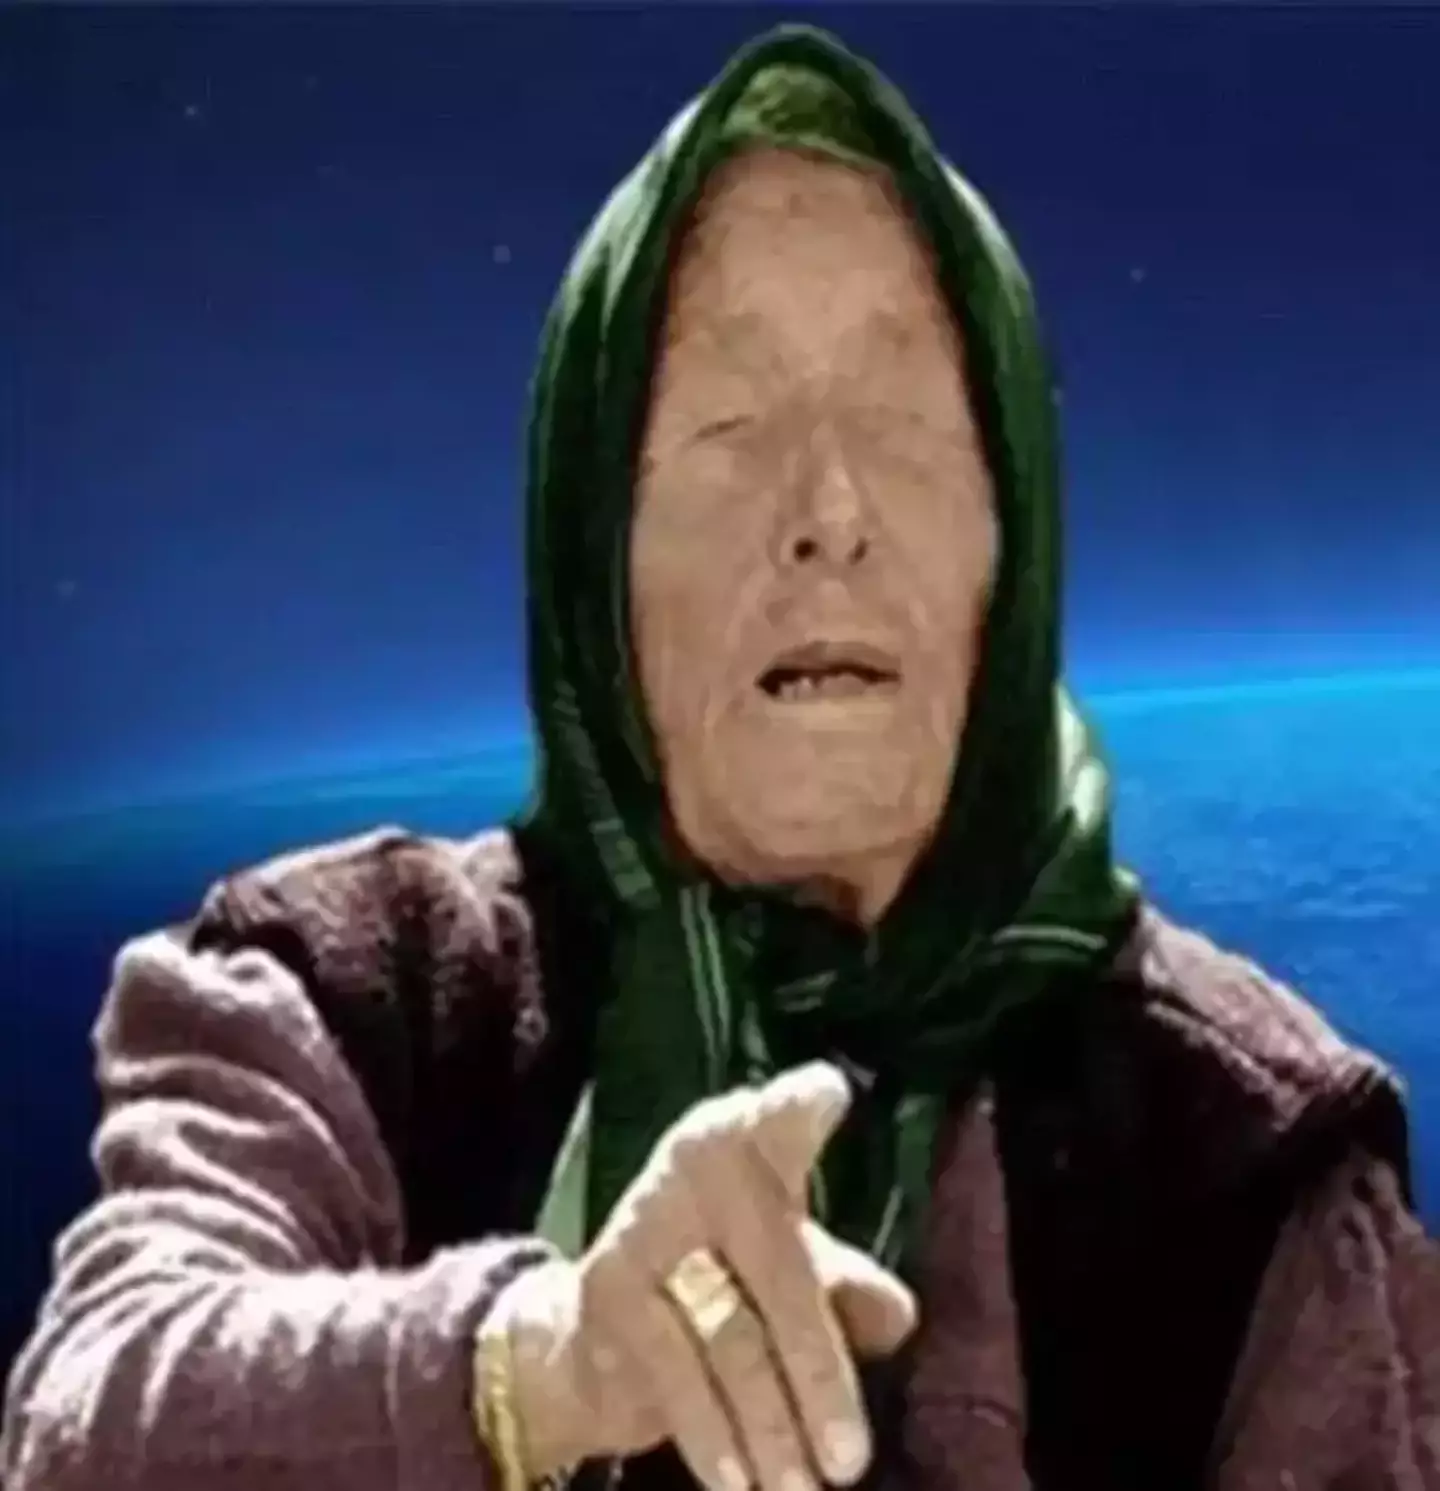 One of the Baba Vanga's chilling 2023 predictions has just come true.